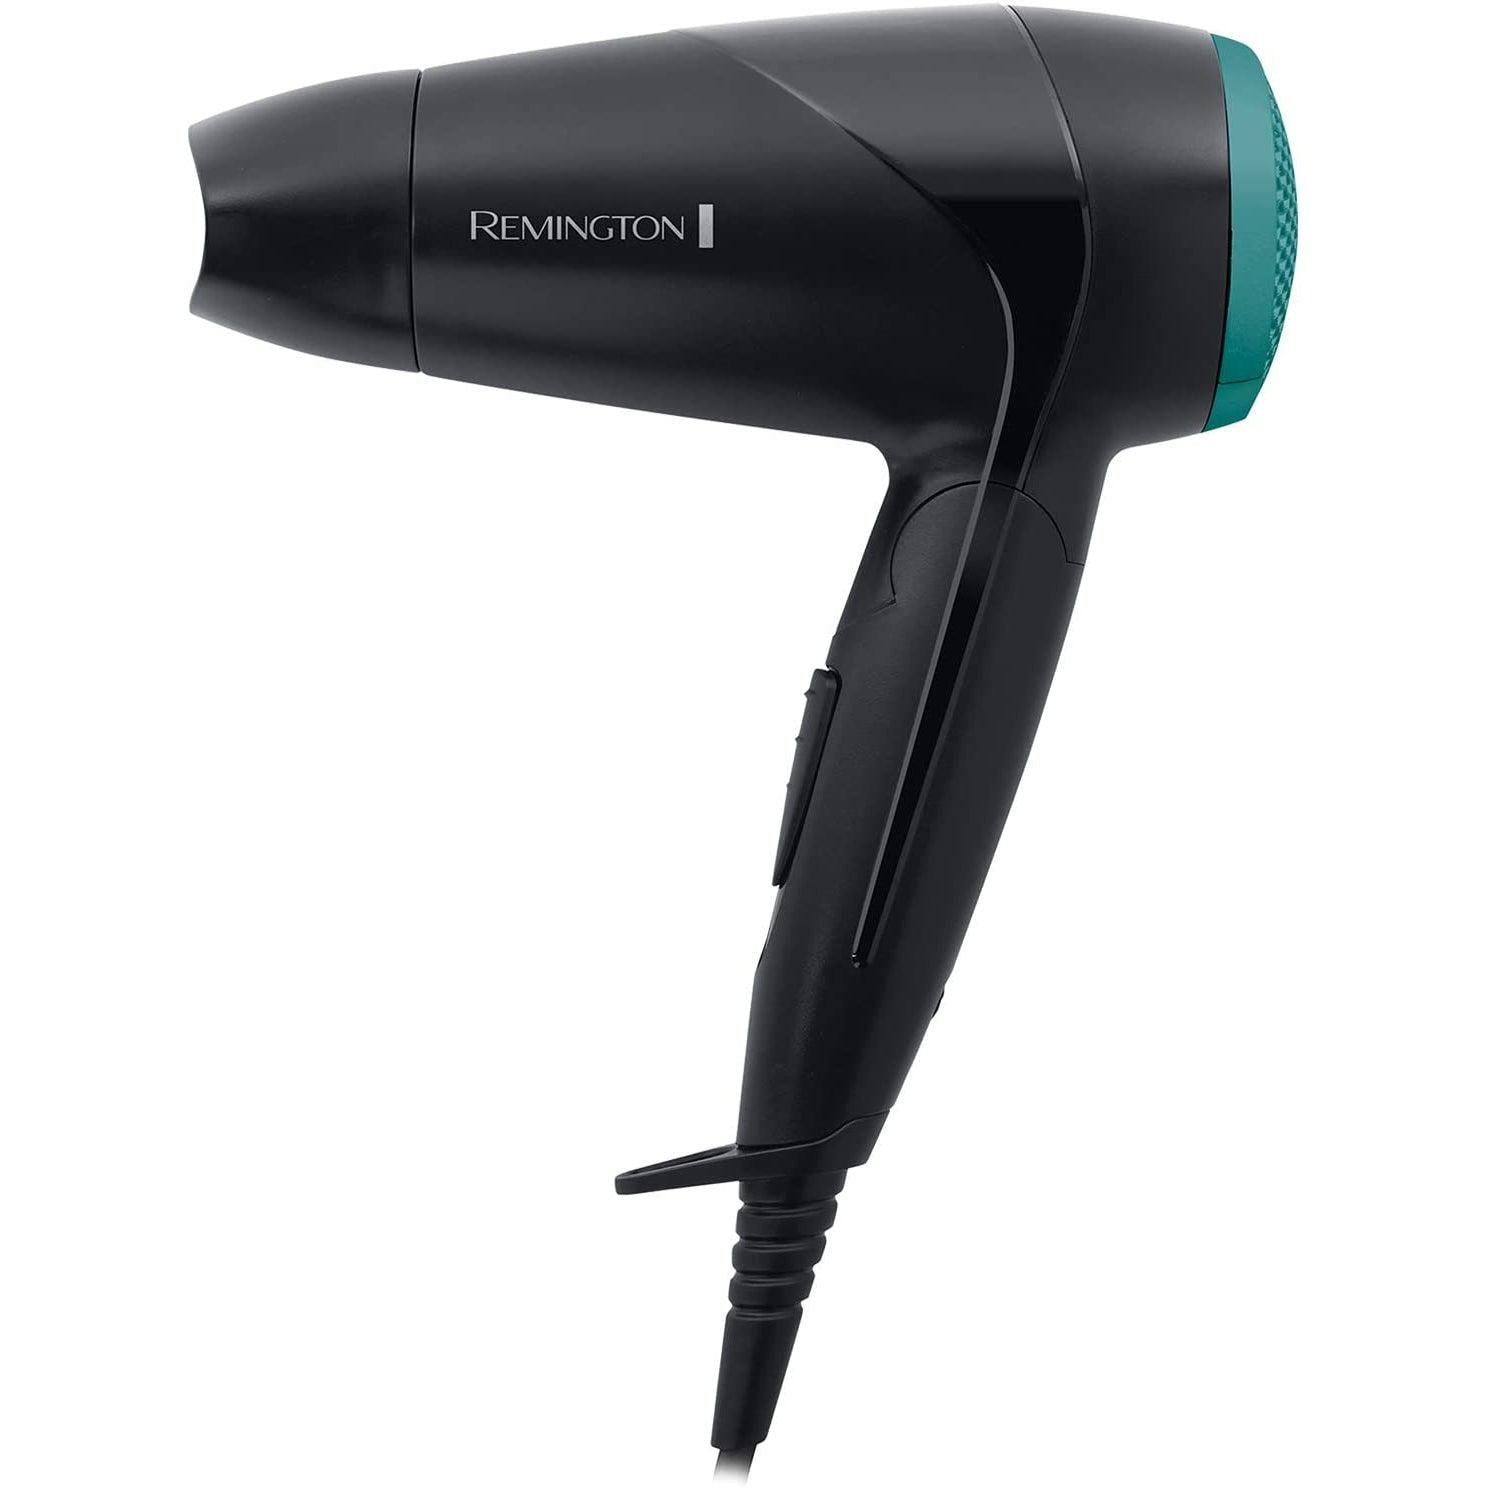 Remington Folding Travel Hairdryer with Mini Concentrator and Diffuser, Worldwide Voltage - D1500, Black - Healthxpress.ie